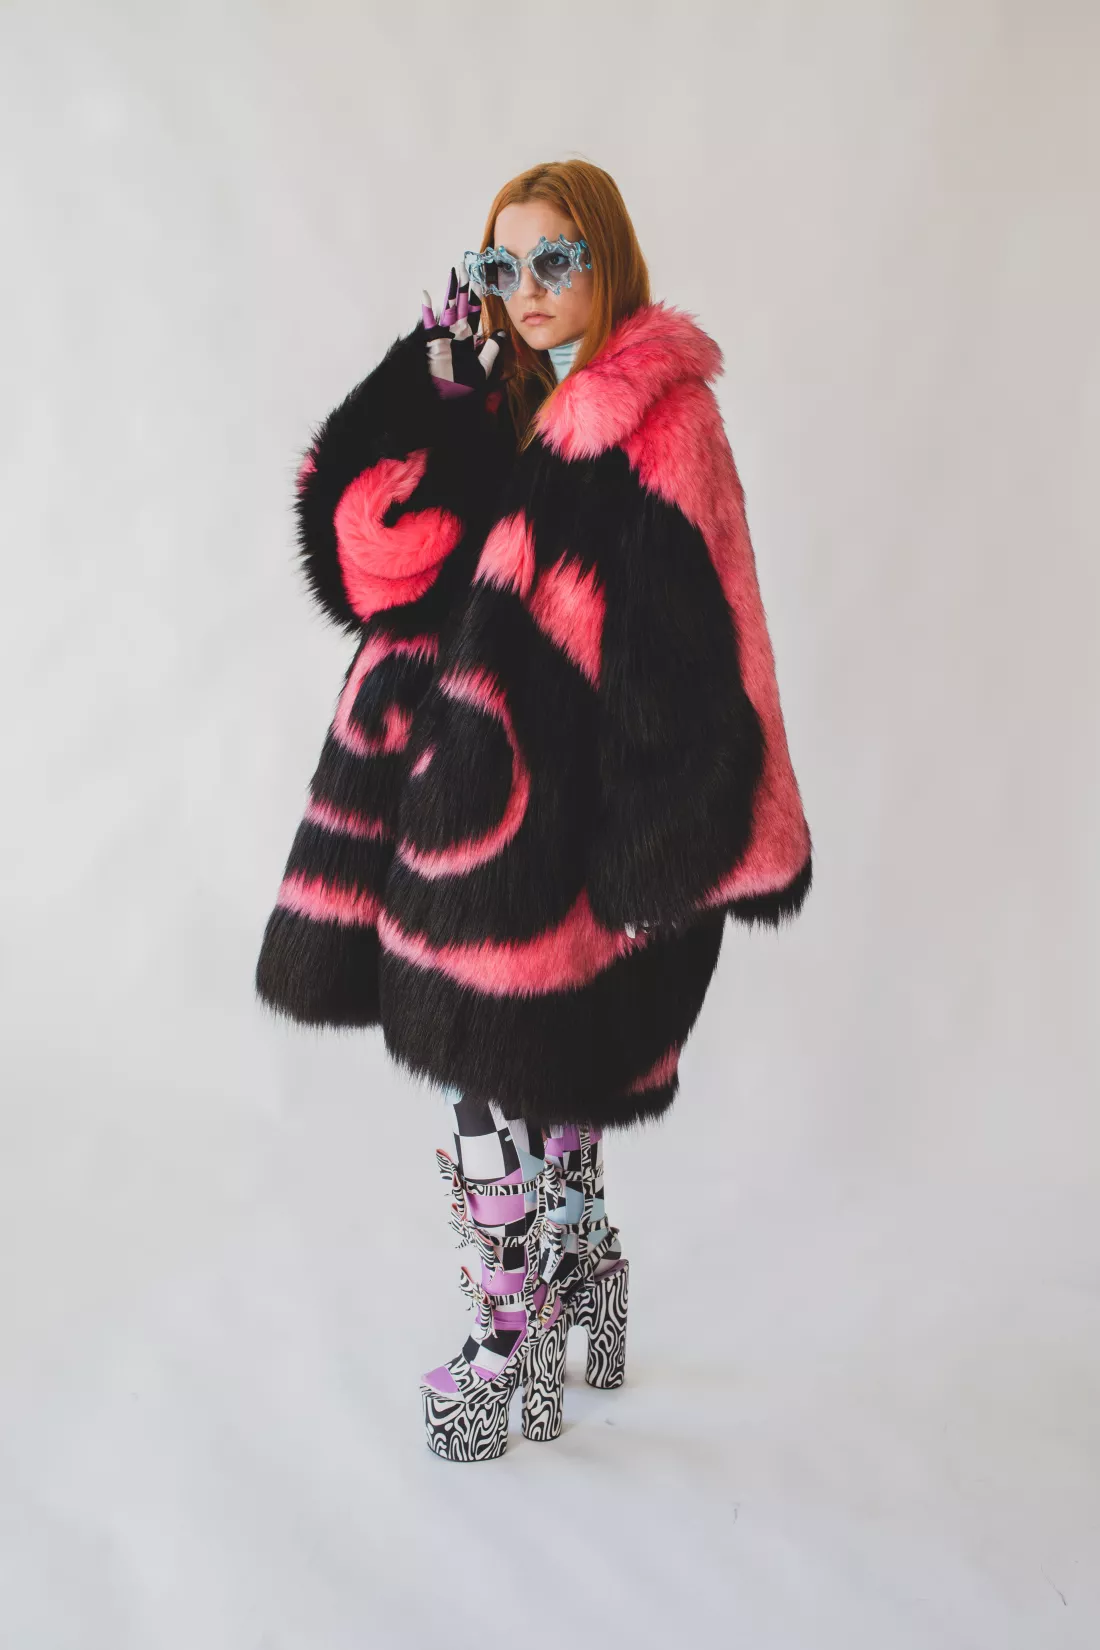 A model wearing the dress, shoes and coat